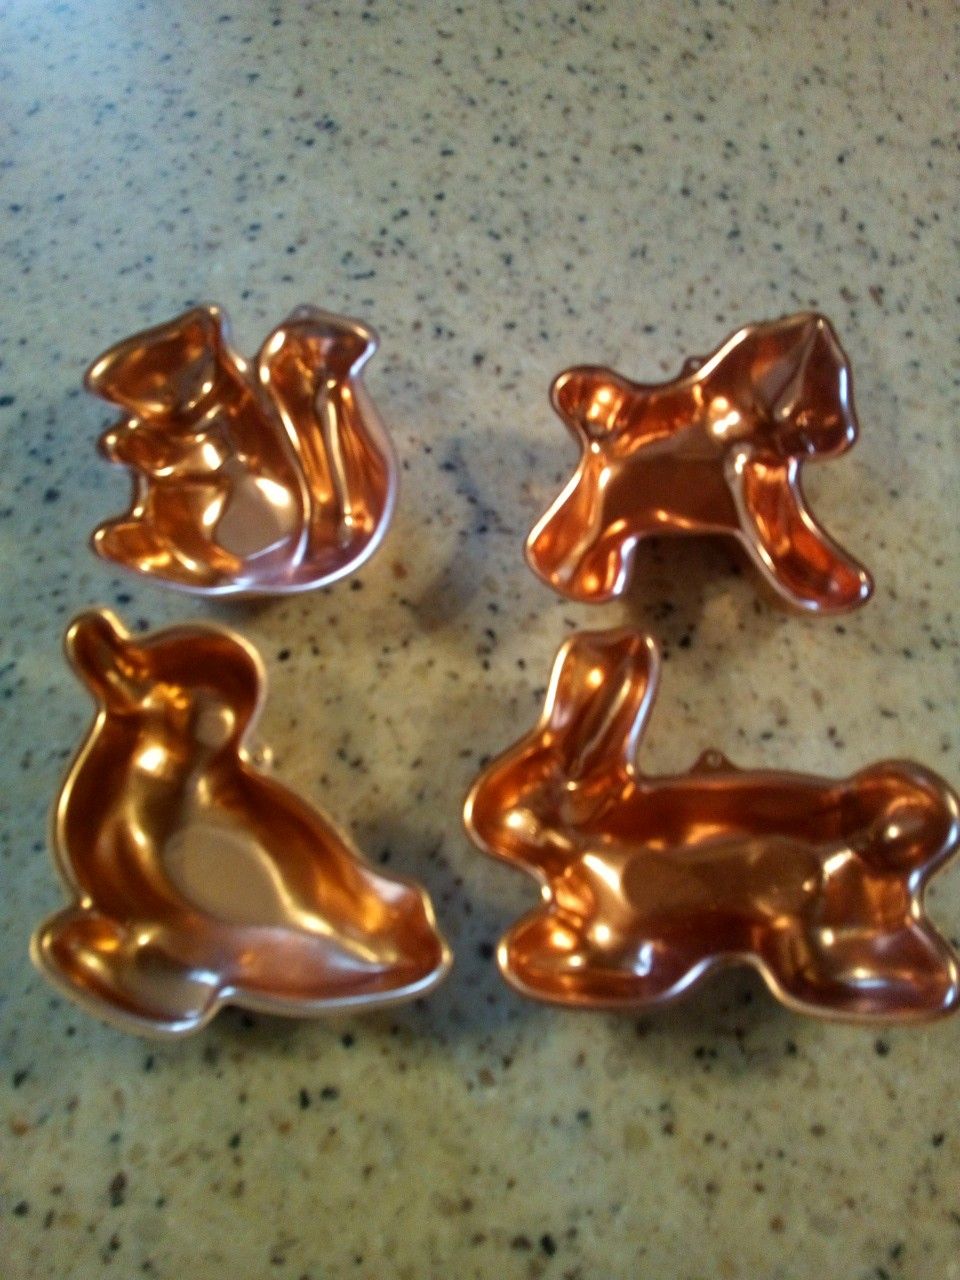 Vintage copper jello molds/ qty.4 3/4 cup molds/ duck/ squirrel/ horse/ rabbit/ hanging decoration or use for jello